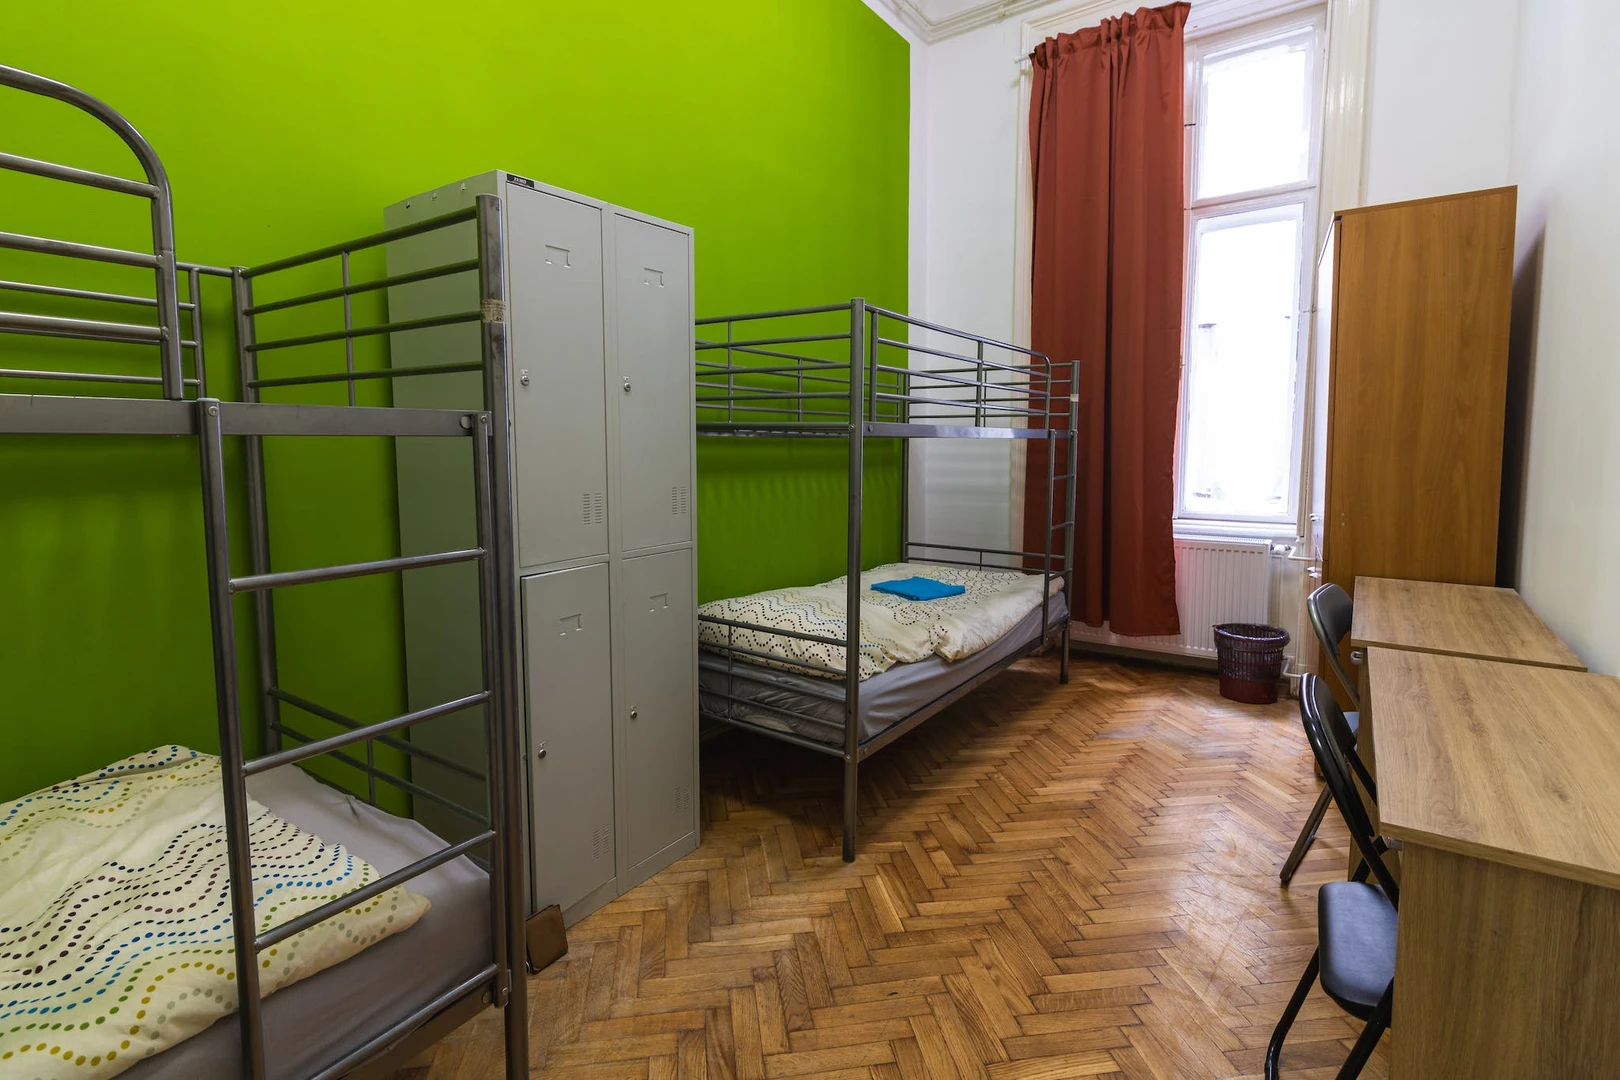 Shared room with another student in budapest